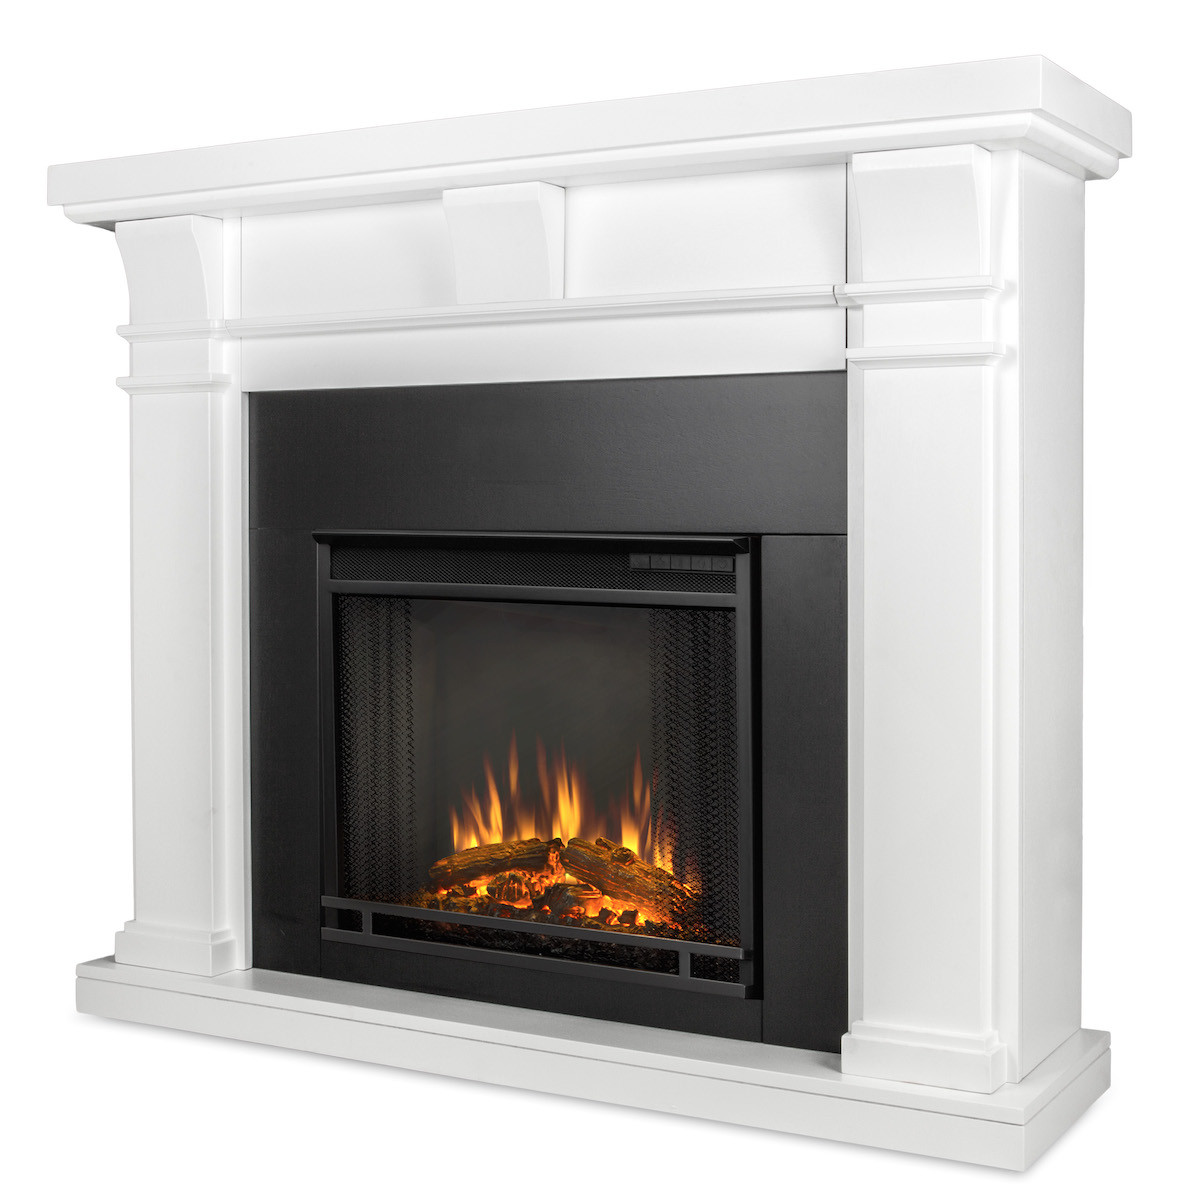 Real Flame White Electric Fireplace
 Real Flame Porter Electric Fireplace in White